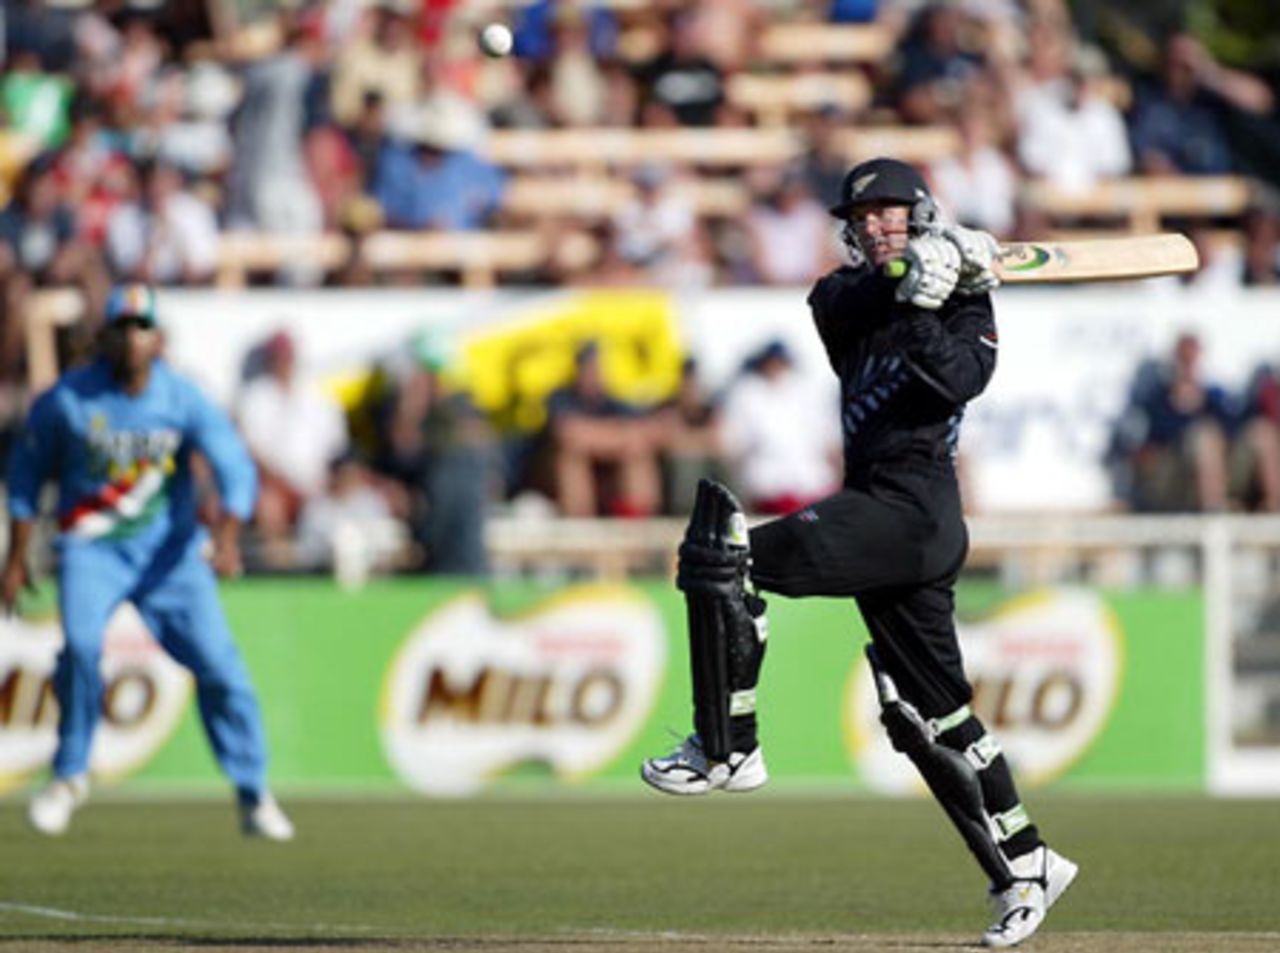 New Zealand batsman Nathan Astle pulls a delivery from Indian bowler Javagal Srinath to the midwicket boundary for four during his innings of 32. 3rd ODI: New Zealand v India at Jade Stadium, Christchurch, 1 January 2003.